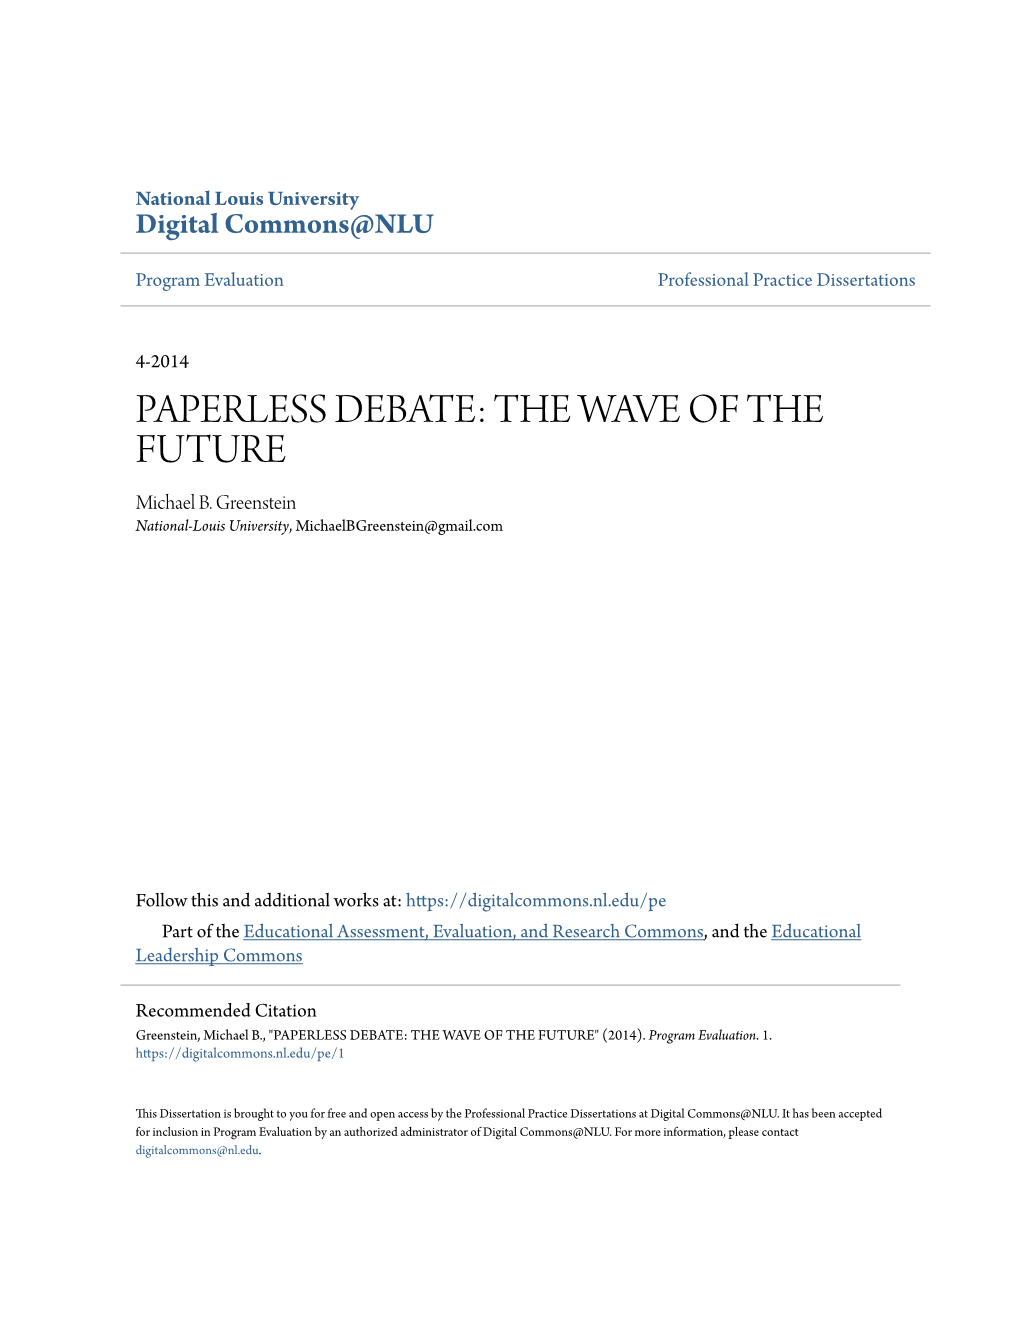 PAPERLESS DEBATE: the WAVE of the FUTURE Michael B